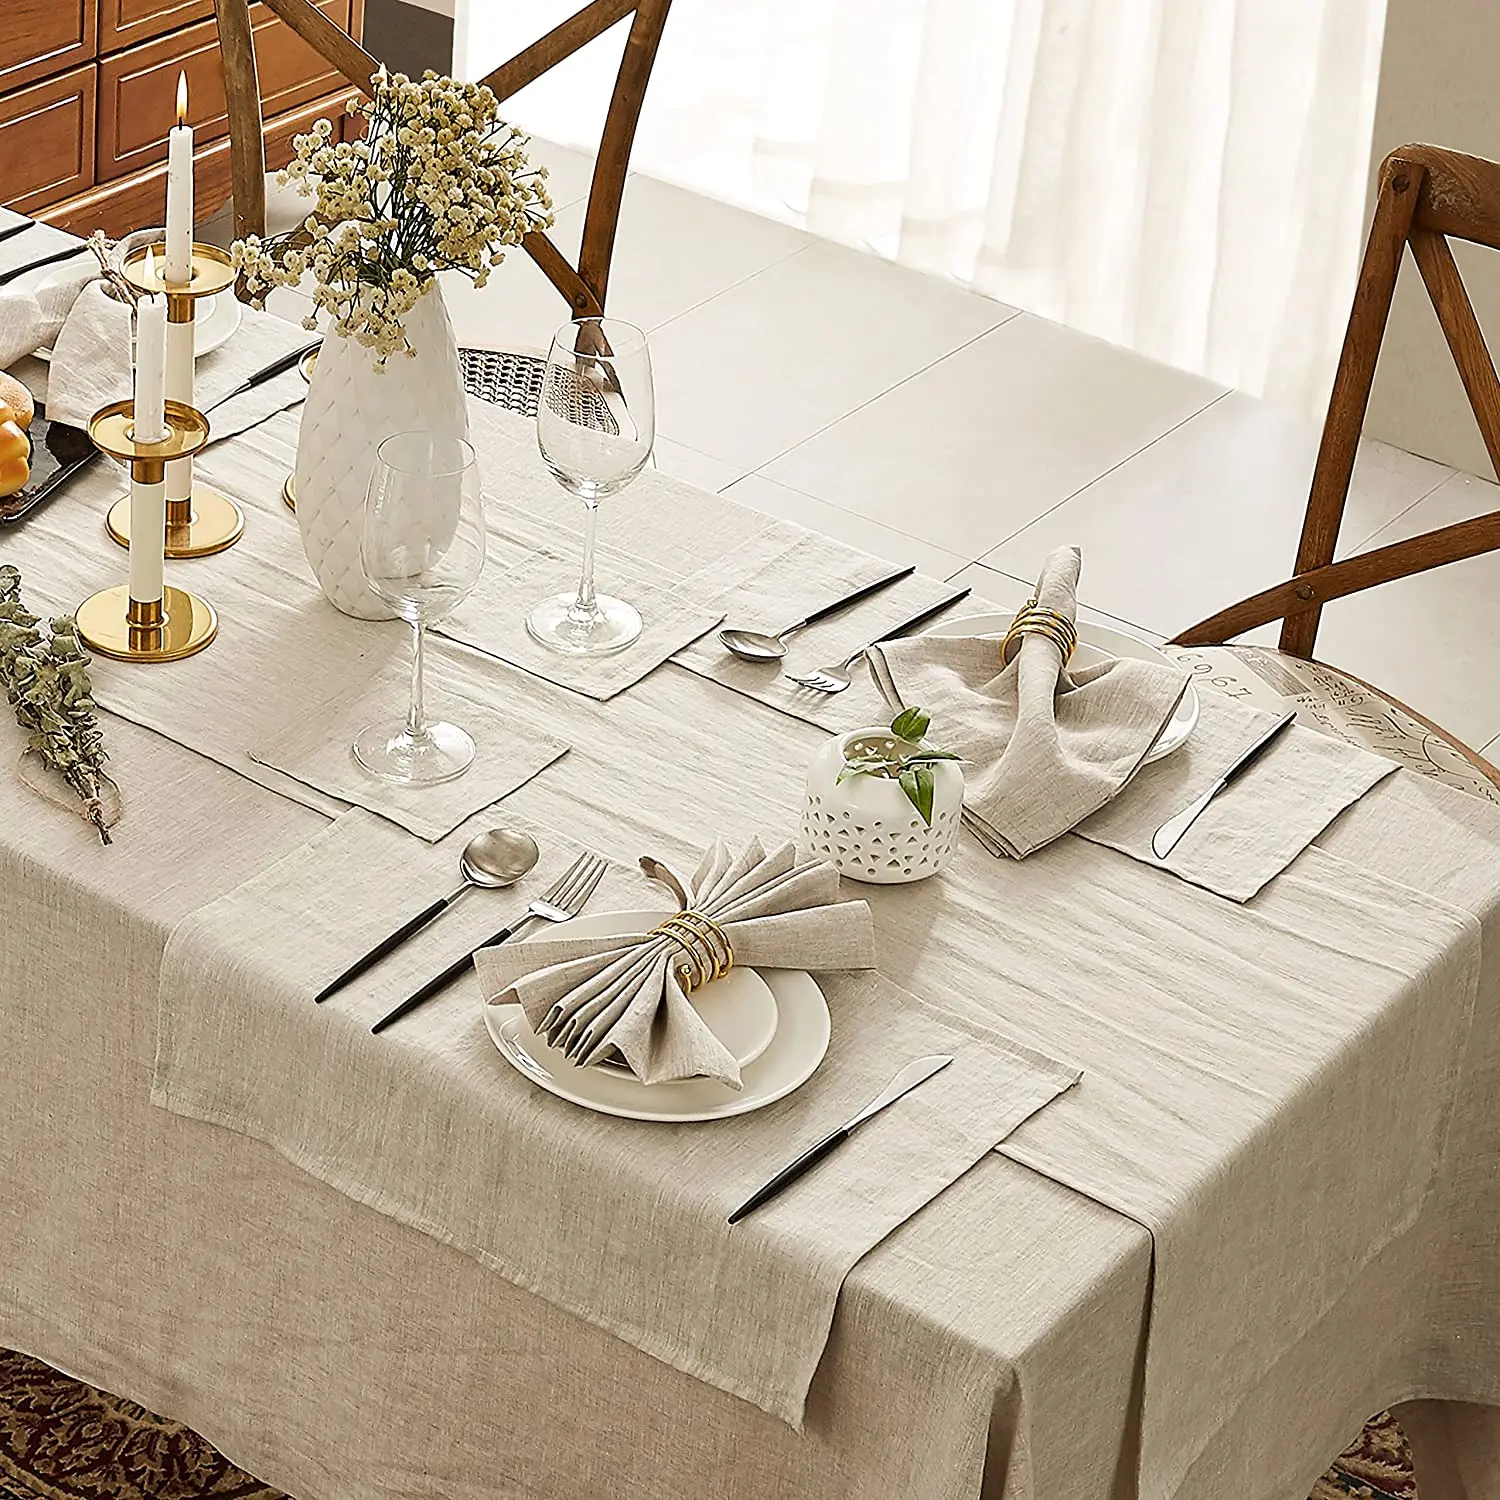 https://ae01.alicdn.com/kf/S30d840c717b448a88e414c90c1c4ee16L/4PCS-45X45CM-Pure-Linen-Napkins-Cloths-Soft-Comfortable-Fabric-Reusable-Kitchen-Accessories-for-Wedding-Birthday-Parties.jpg